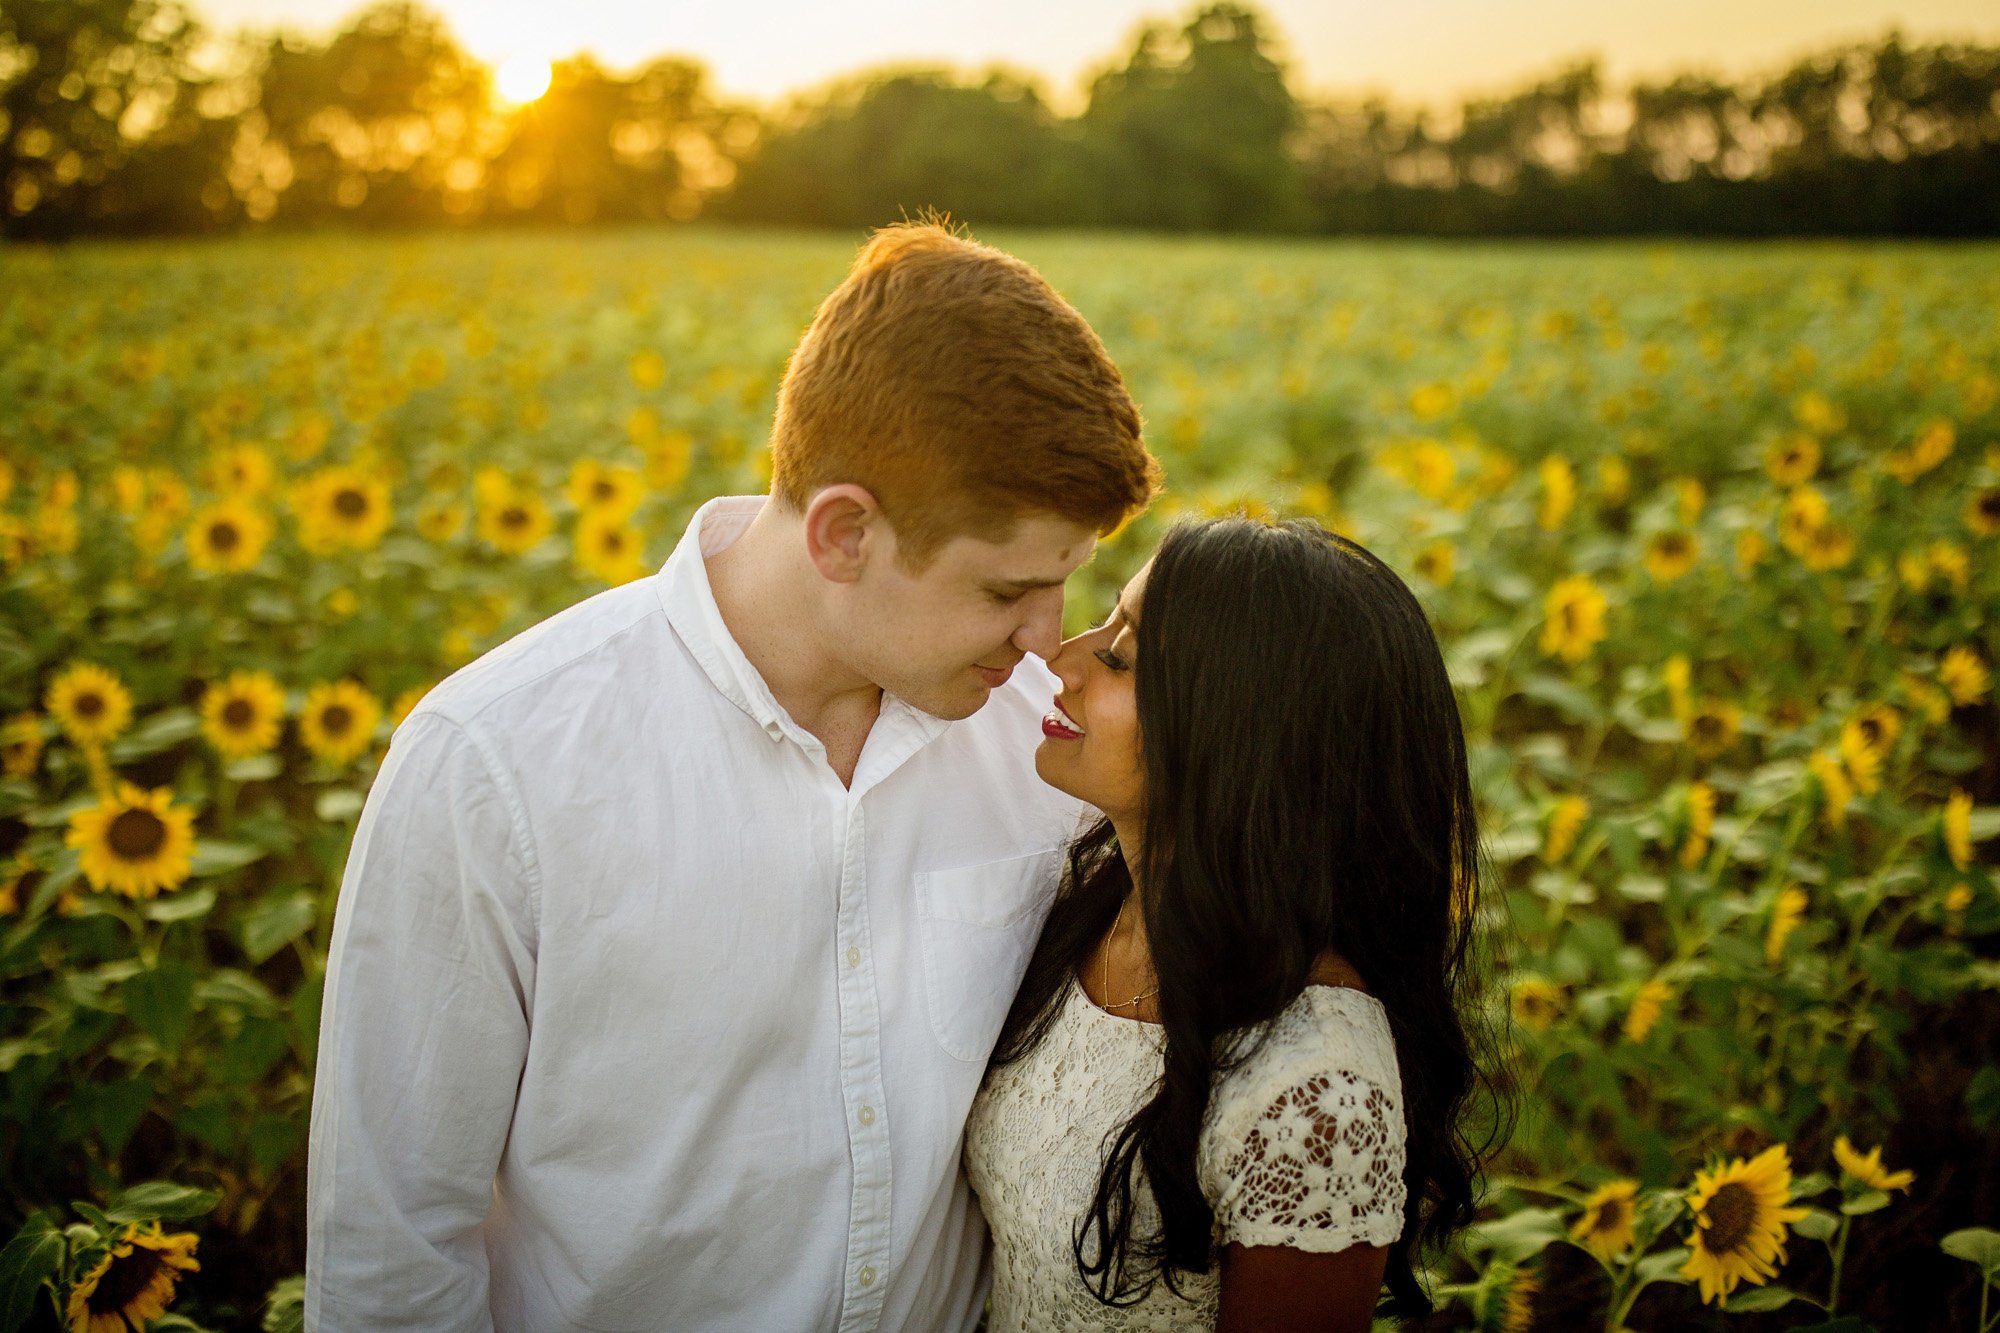 Seriously_Sabrina_Photography_Lexington_Midway_Kentucky_Engagement_Merefield_Sunflowers_Naz_and_Drew22.jpg